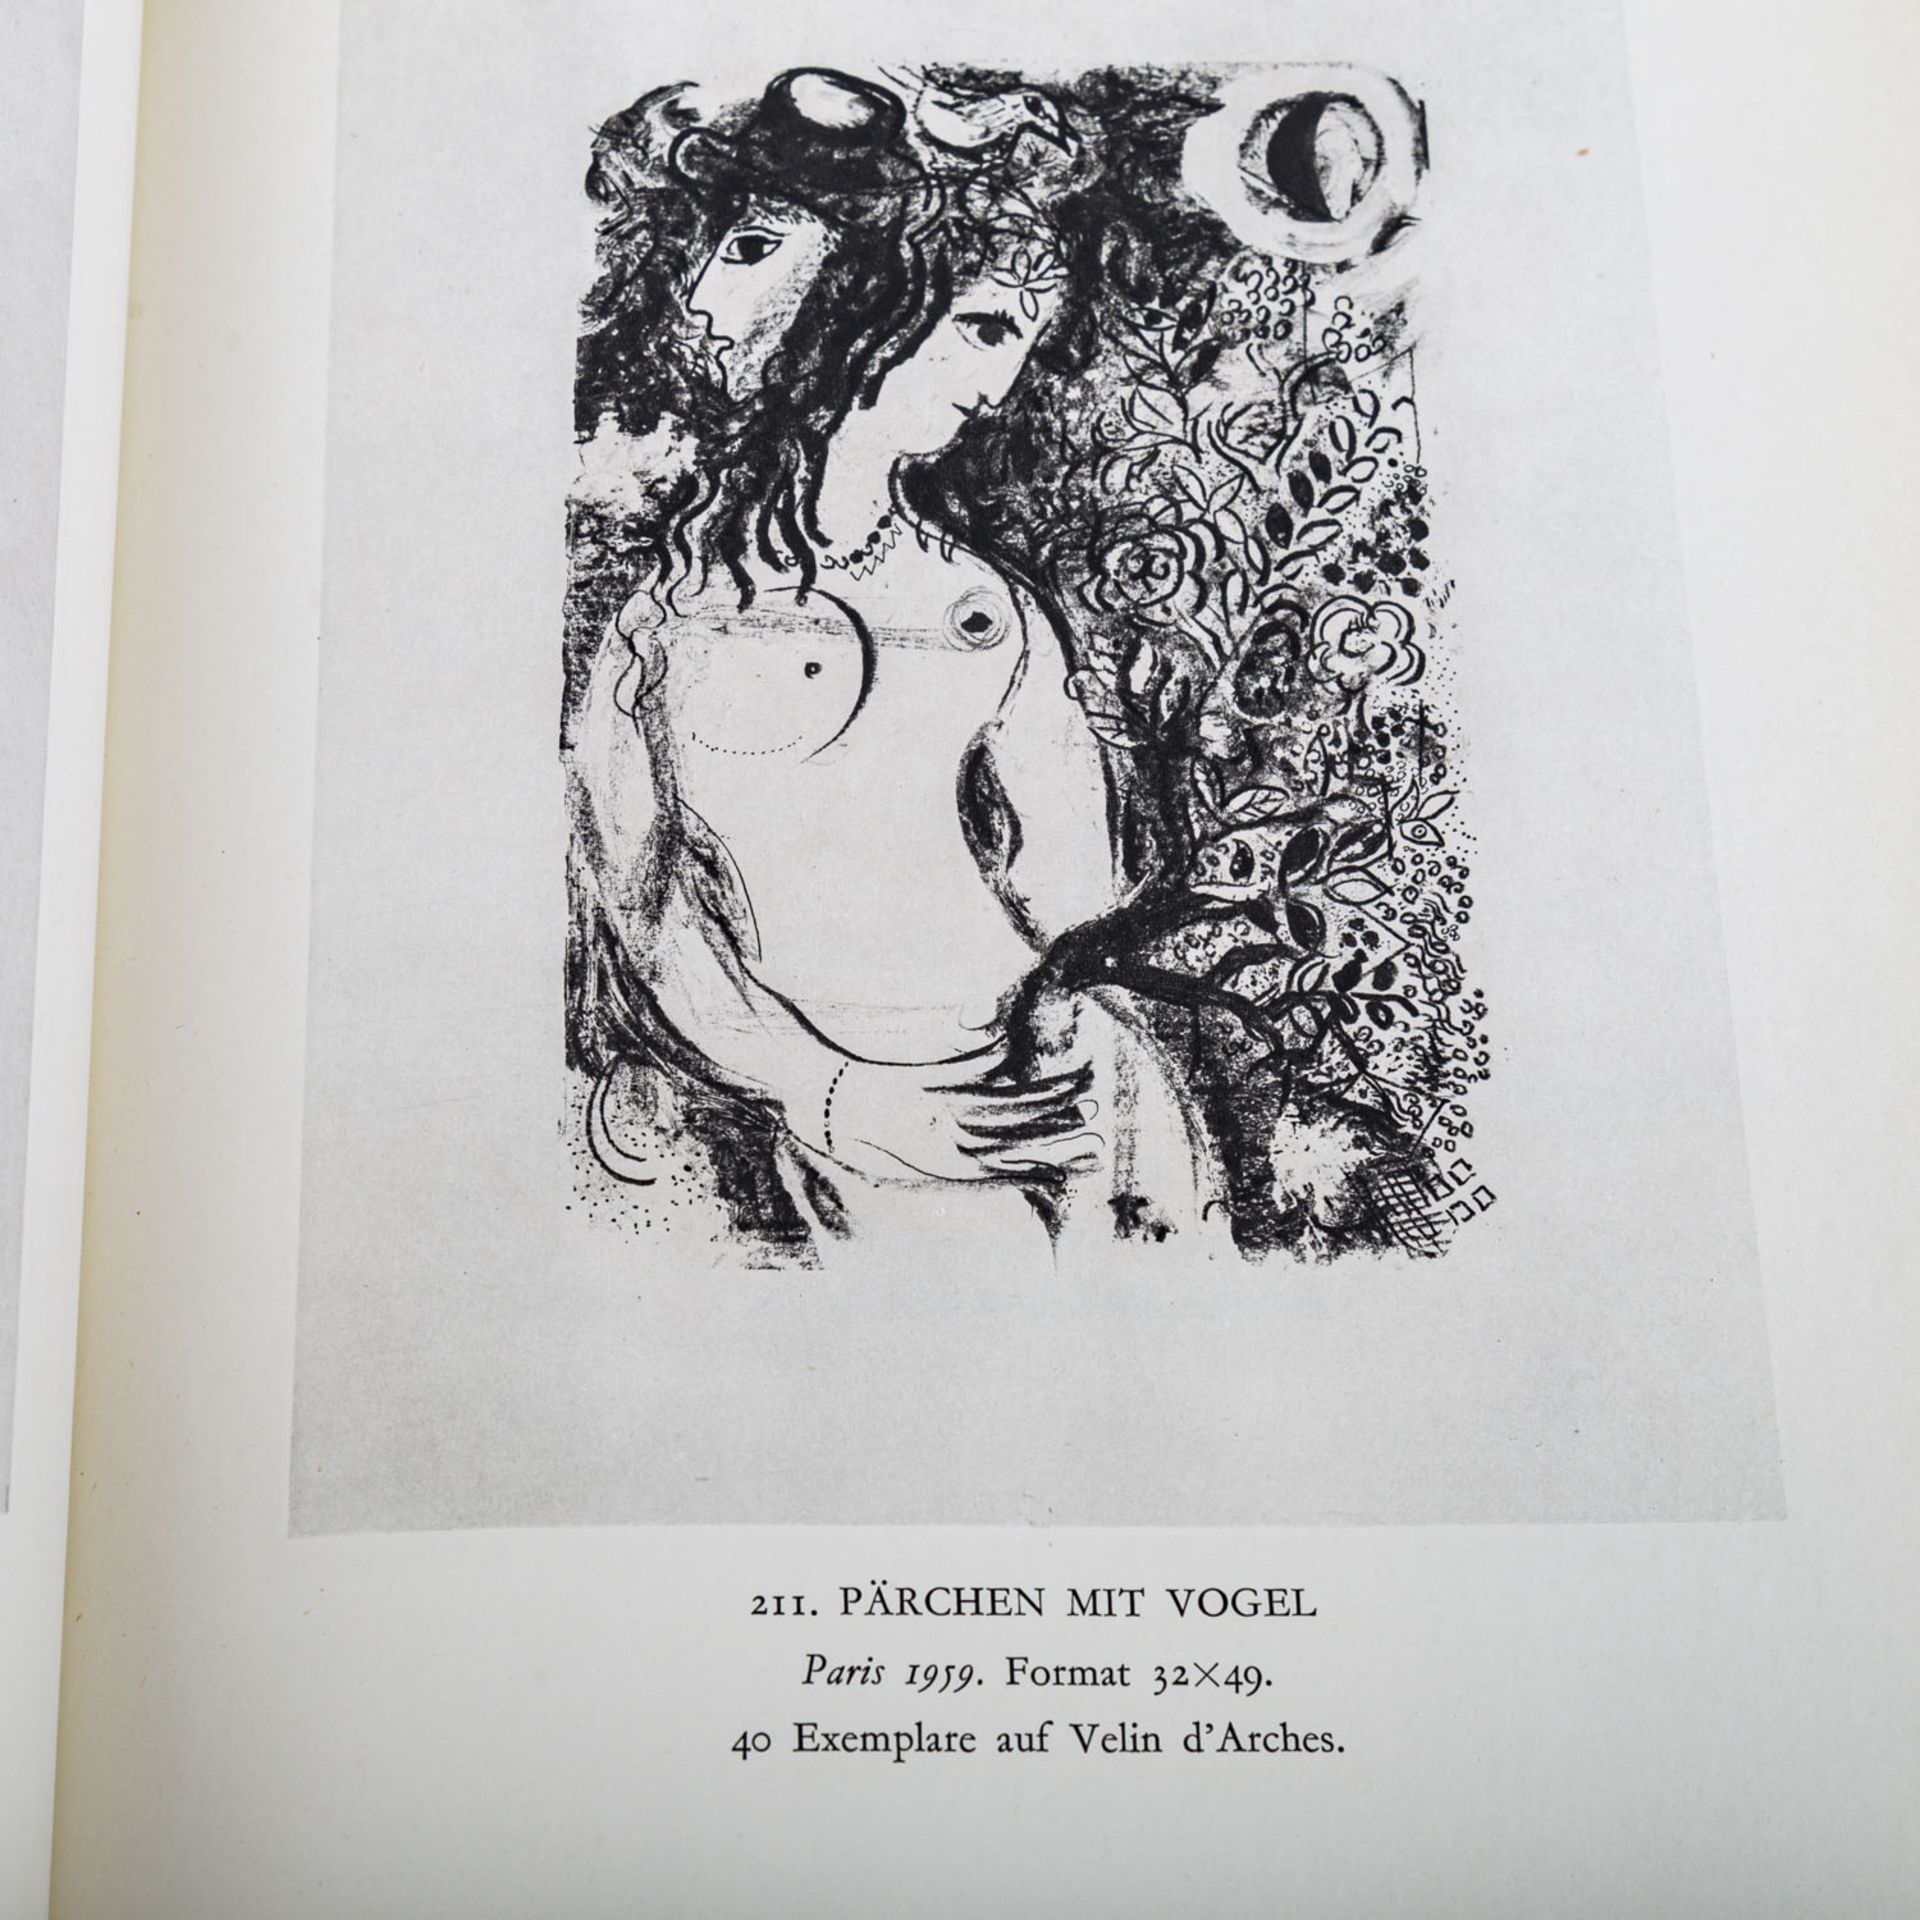 MOURLOT, FERNAND, Chagall, Lithograph II 1957-1962,Monte Carlo: André Sauret 1963. Mit - Image 3 of 4